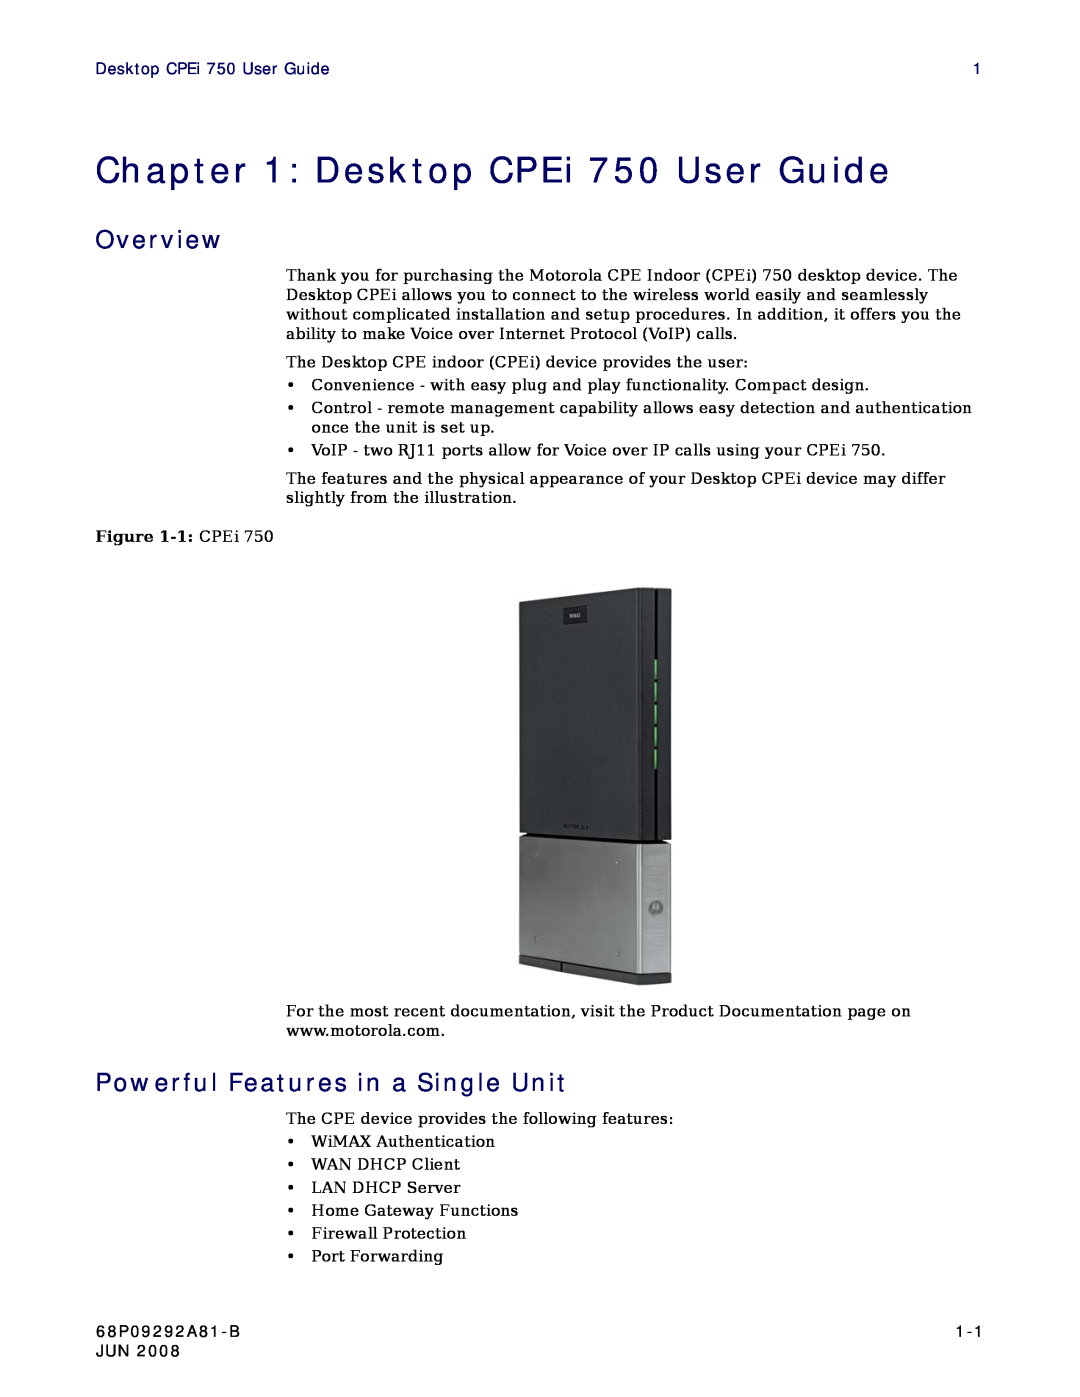 Motorola CPEI 750 manual Desktop CPEi 750 User Guide, Overview, Powerful Features in a Single Unit, 68P09292A81-B 